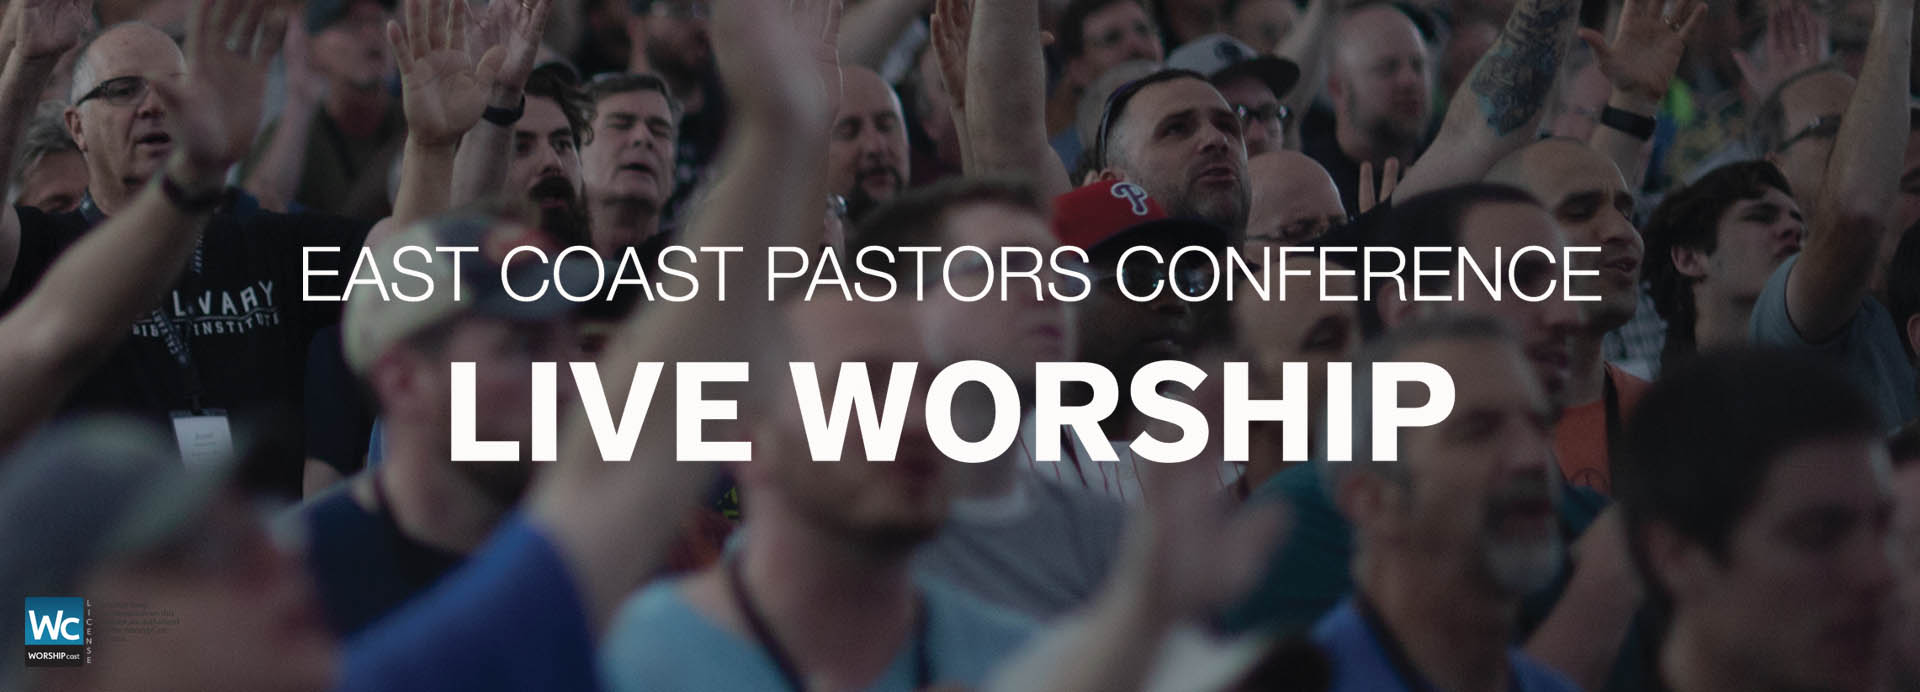 2019 East Coast Pastor's Conference Live Worship